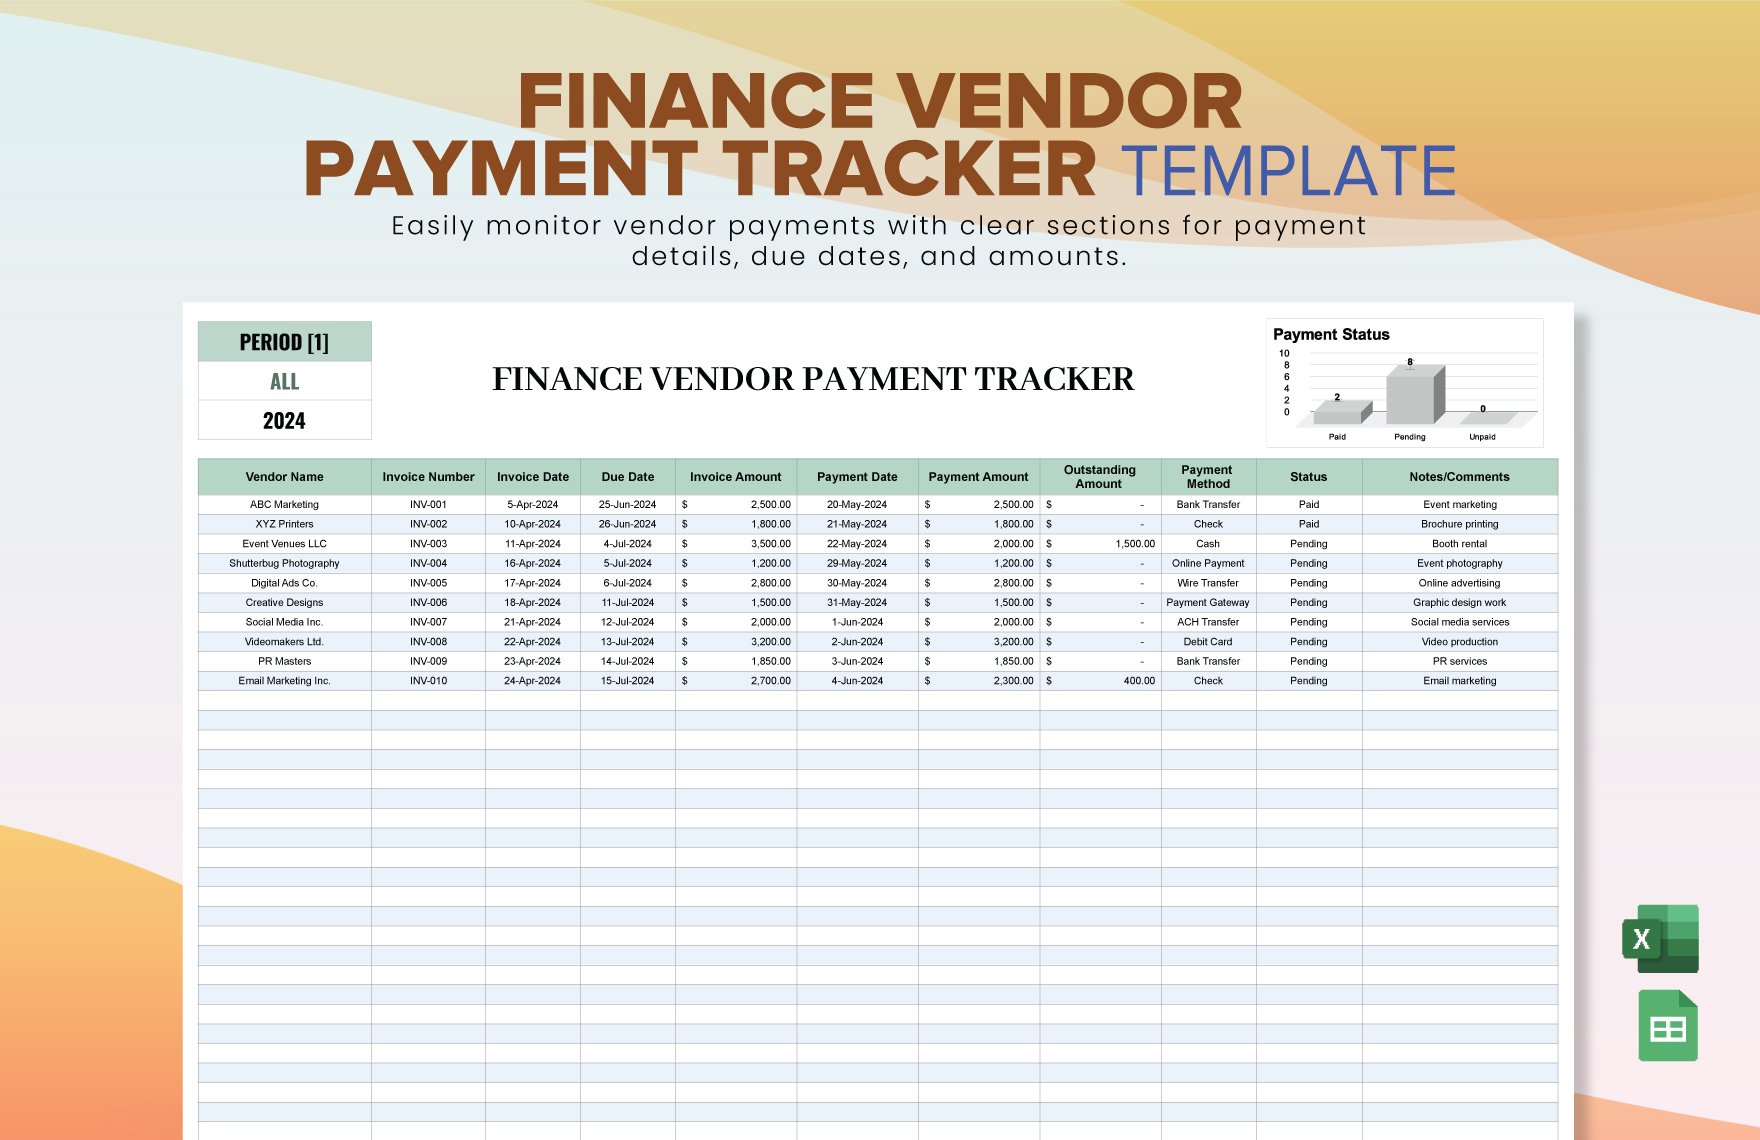 Finance Vendor Payment Tracker Template in Excel, Google Sheets